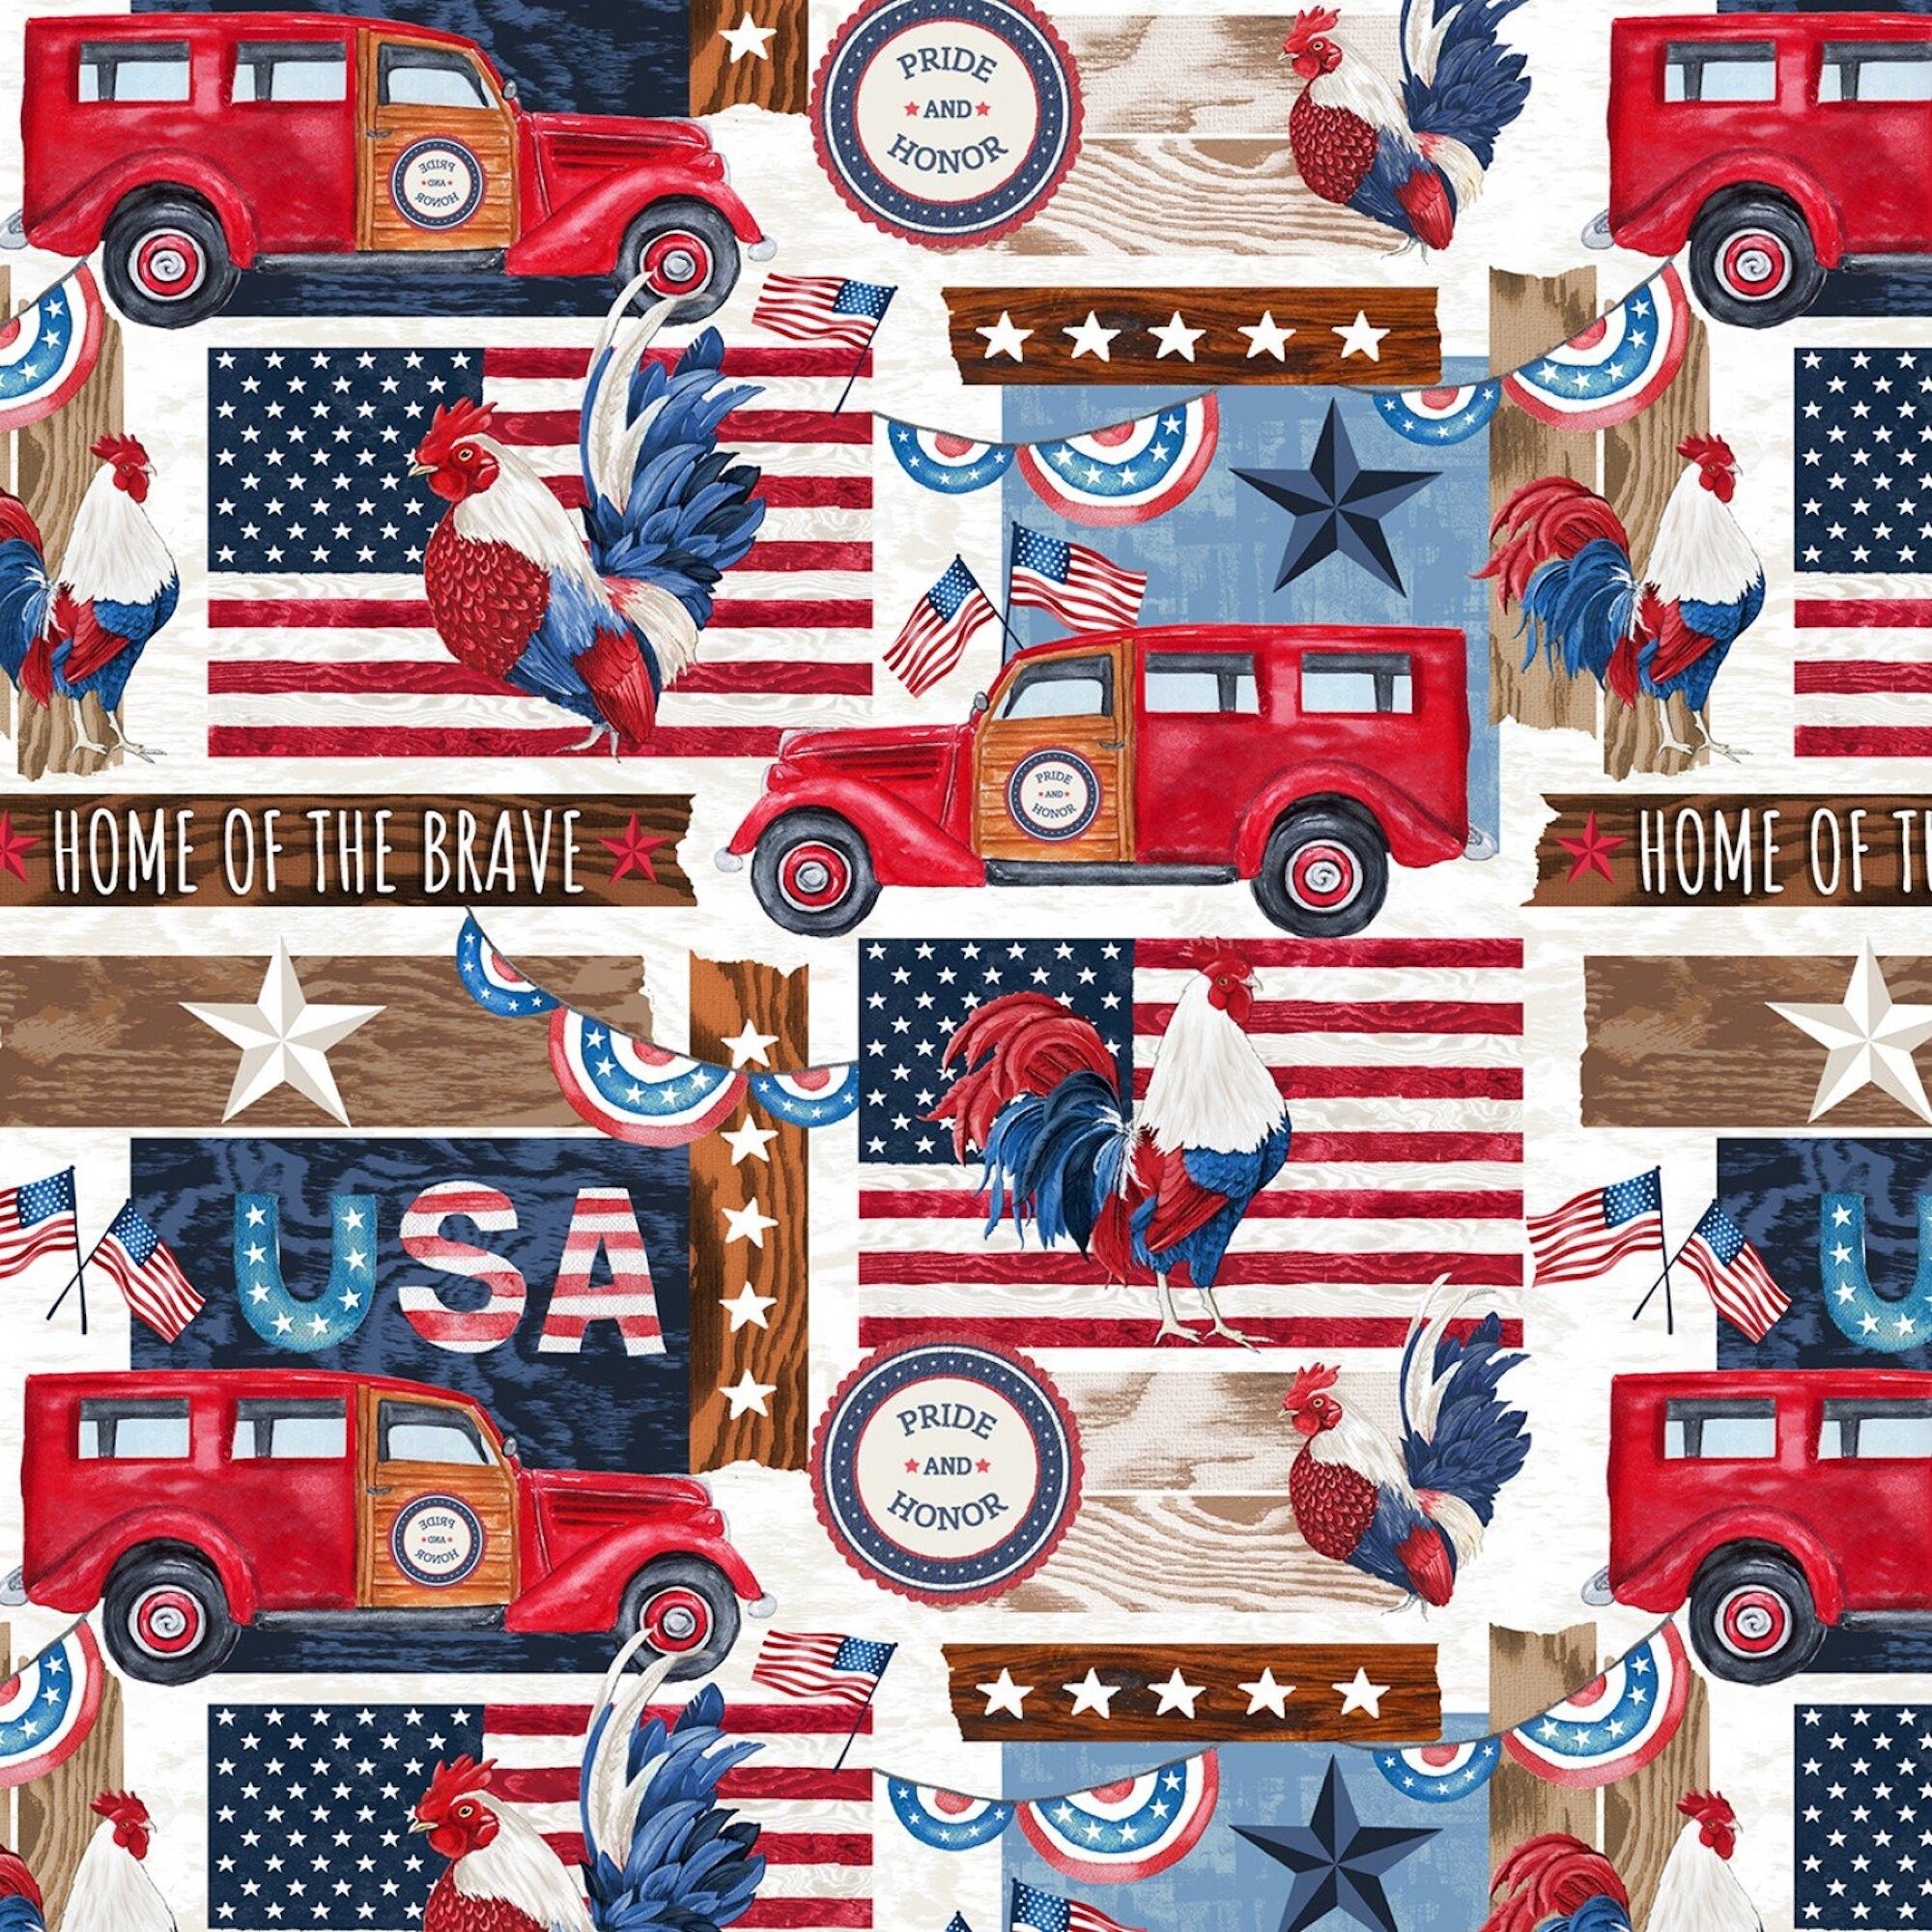 Close up of red, white and blue roosters, red trucks, USA flags and more.